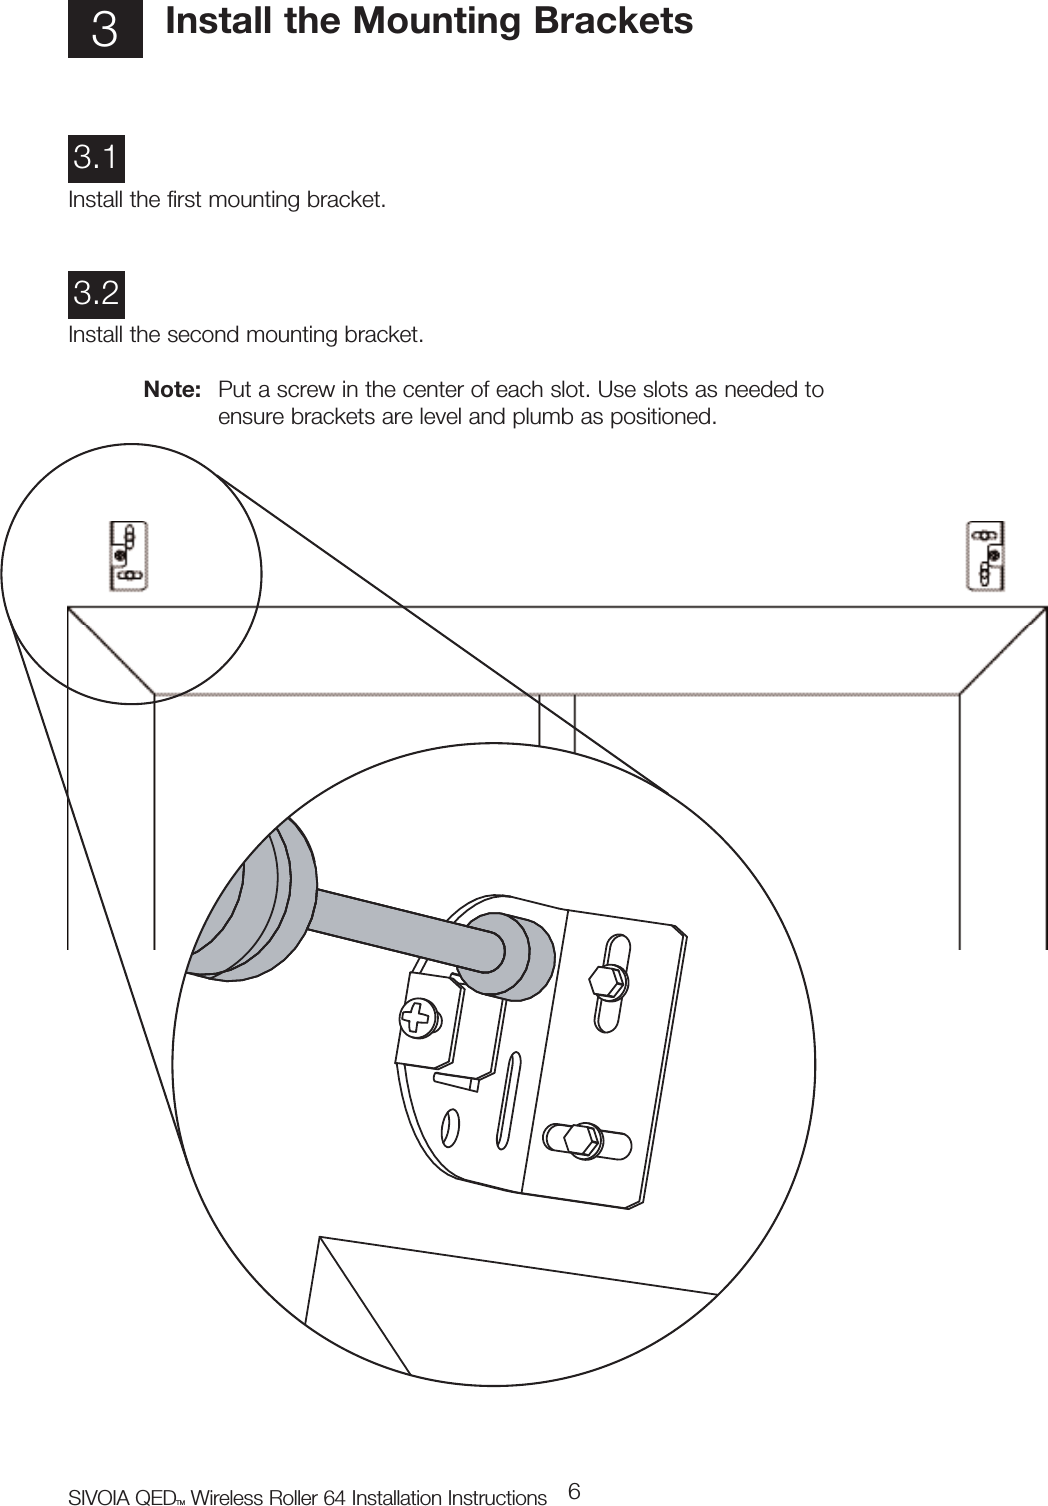 SIVOIA QEDTM Wireless Roller 64 Installation Instructions 63Install the Mounting BracketsInstall the first mounting bracket.3.1Install the second mounting bracket.Note: Put a screw in the center of each slot. Use slots as needed to ensure brackets are level and plumb as positioned.3.2